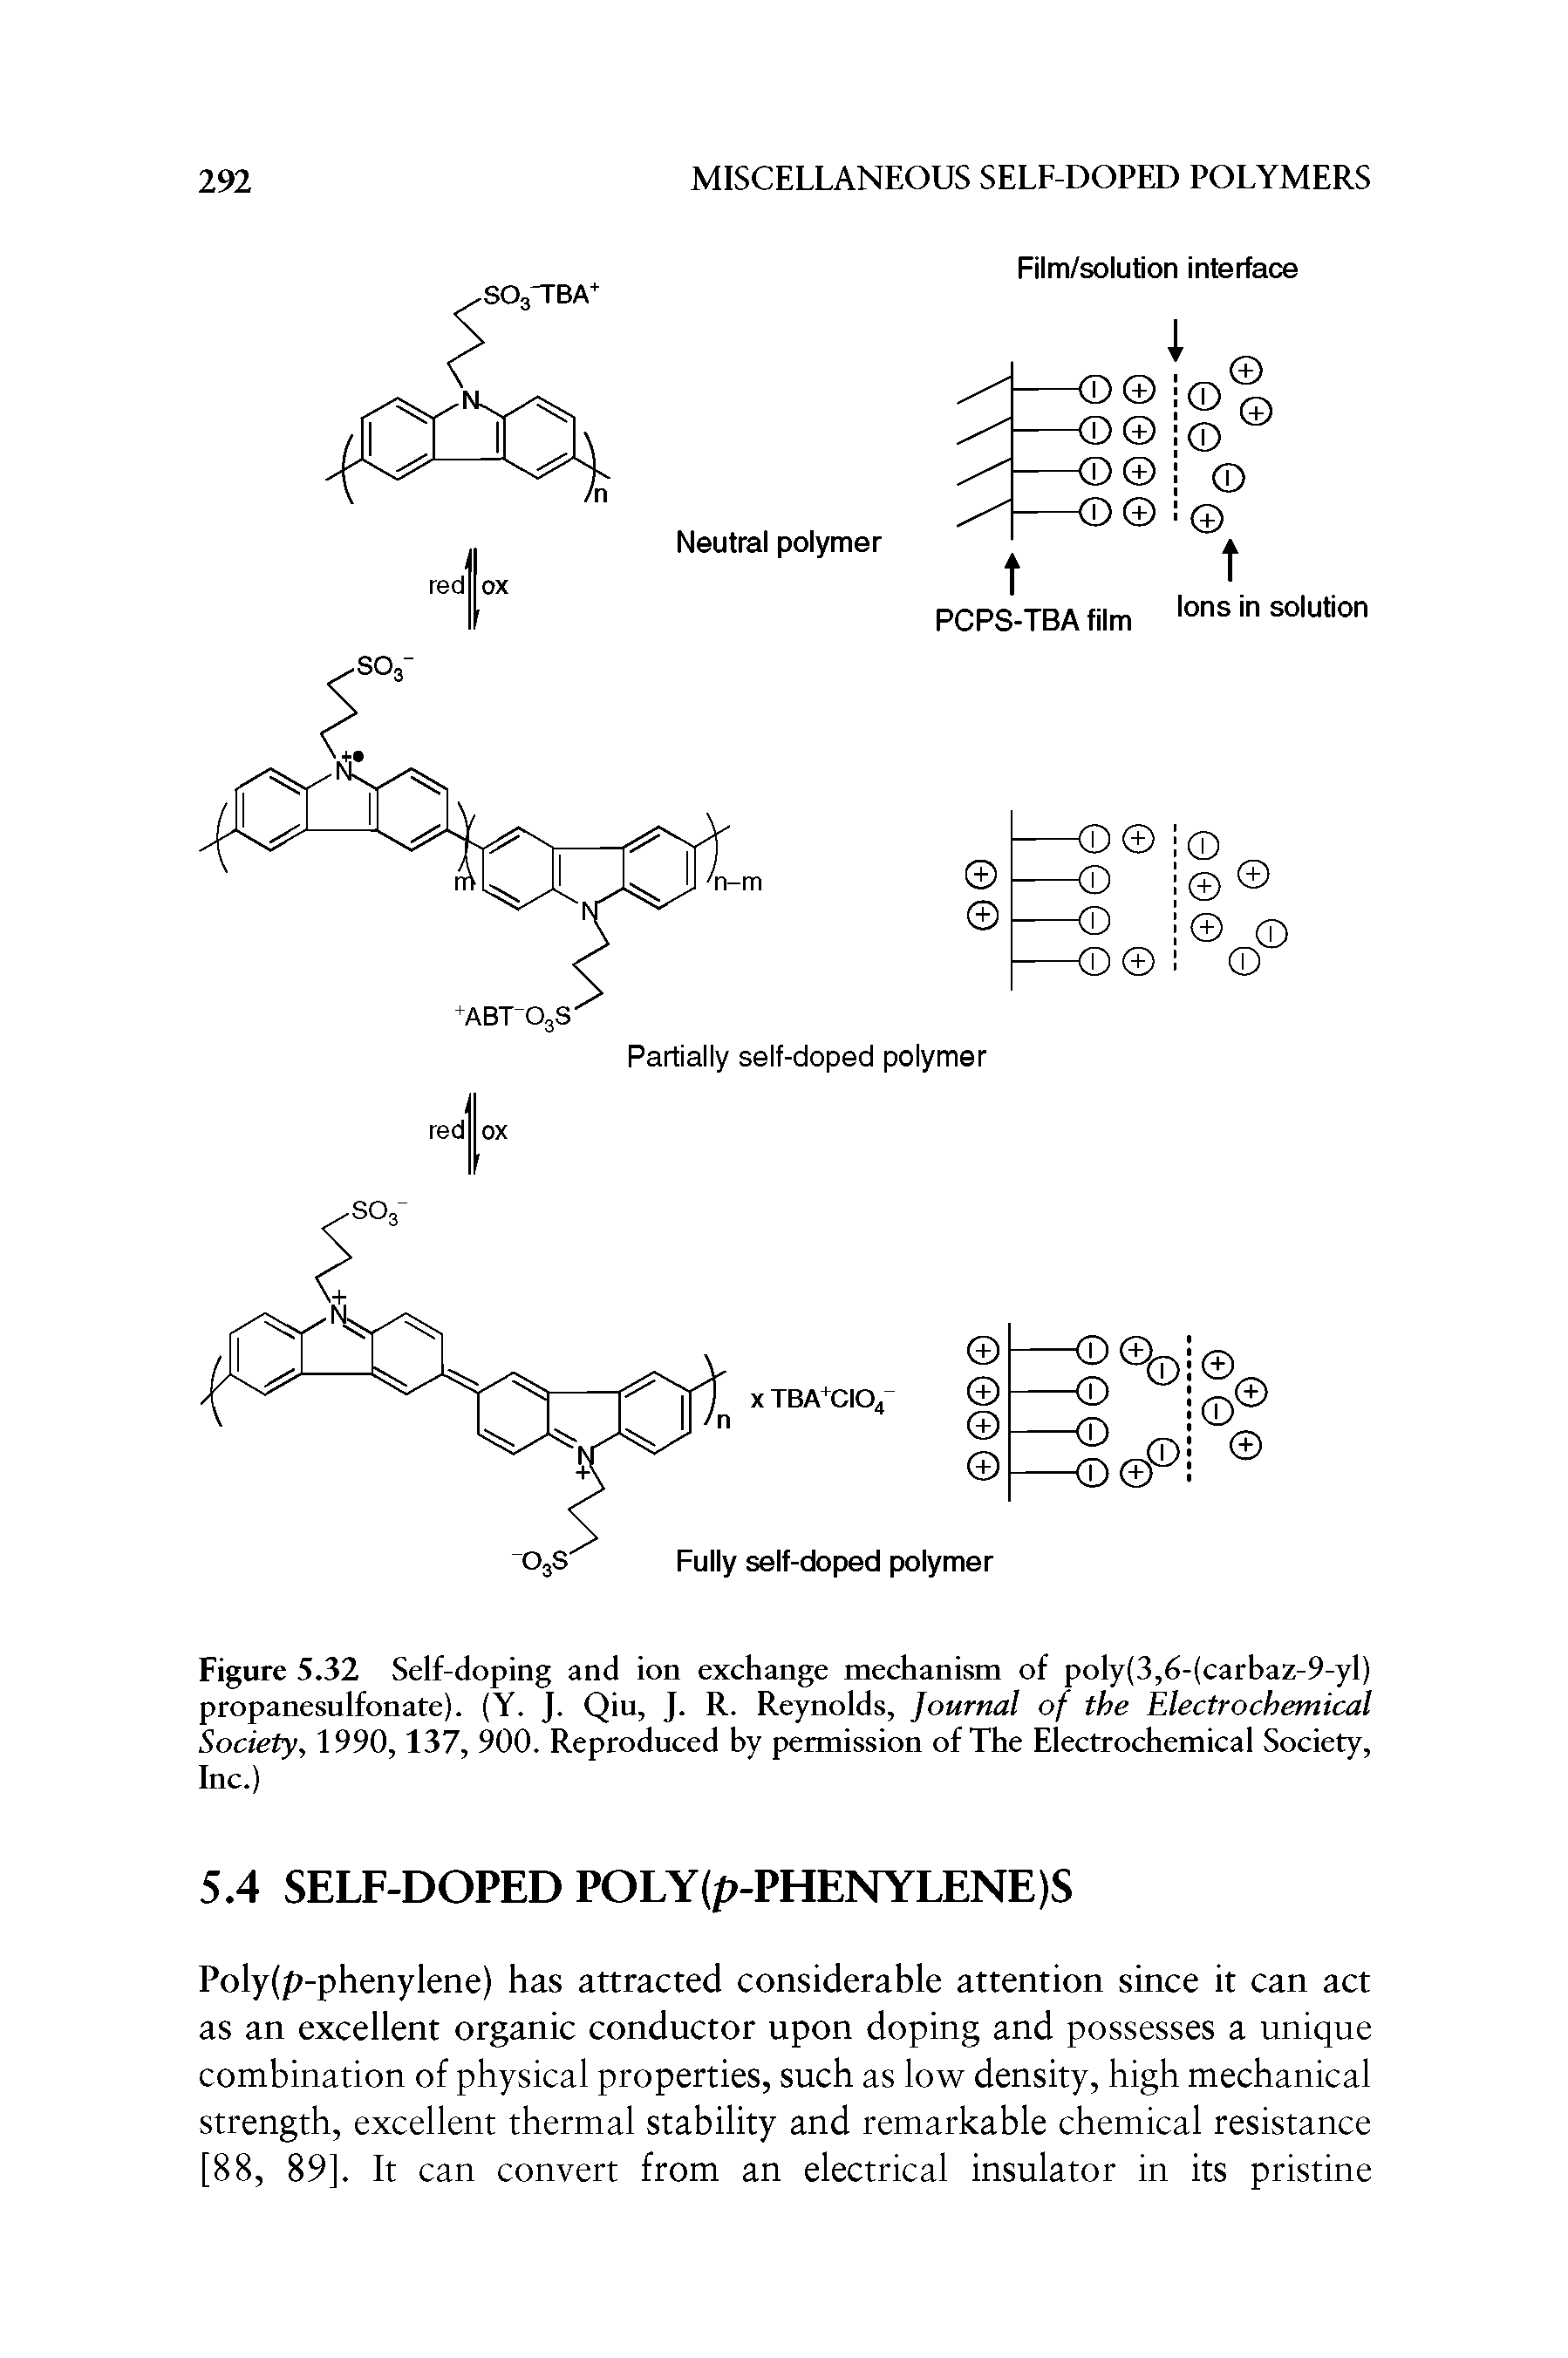 Figure 5.32 Self-doping and ion exchange mechanism of poly(3,6-(carhaz-9-yl) propanesulfonate). (Y. J. Qiu, J. R. Reynolds, Journal of the Electrochemical Society, 1990,137, 900. Reproduced hy permission of The Electrochemical Society, Inc.)...